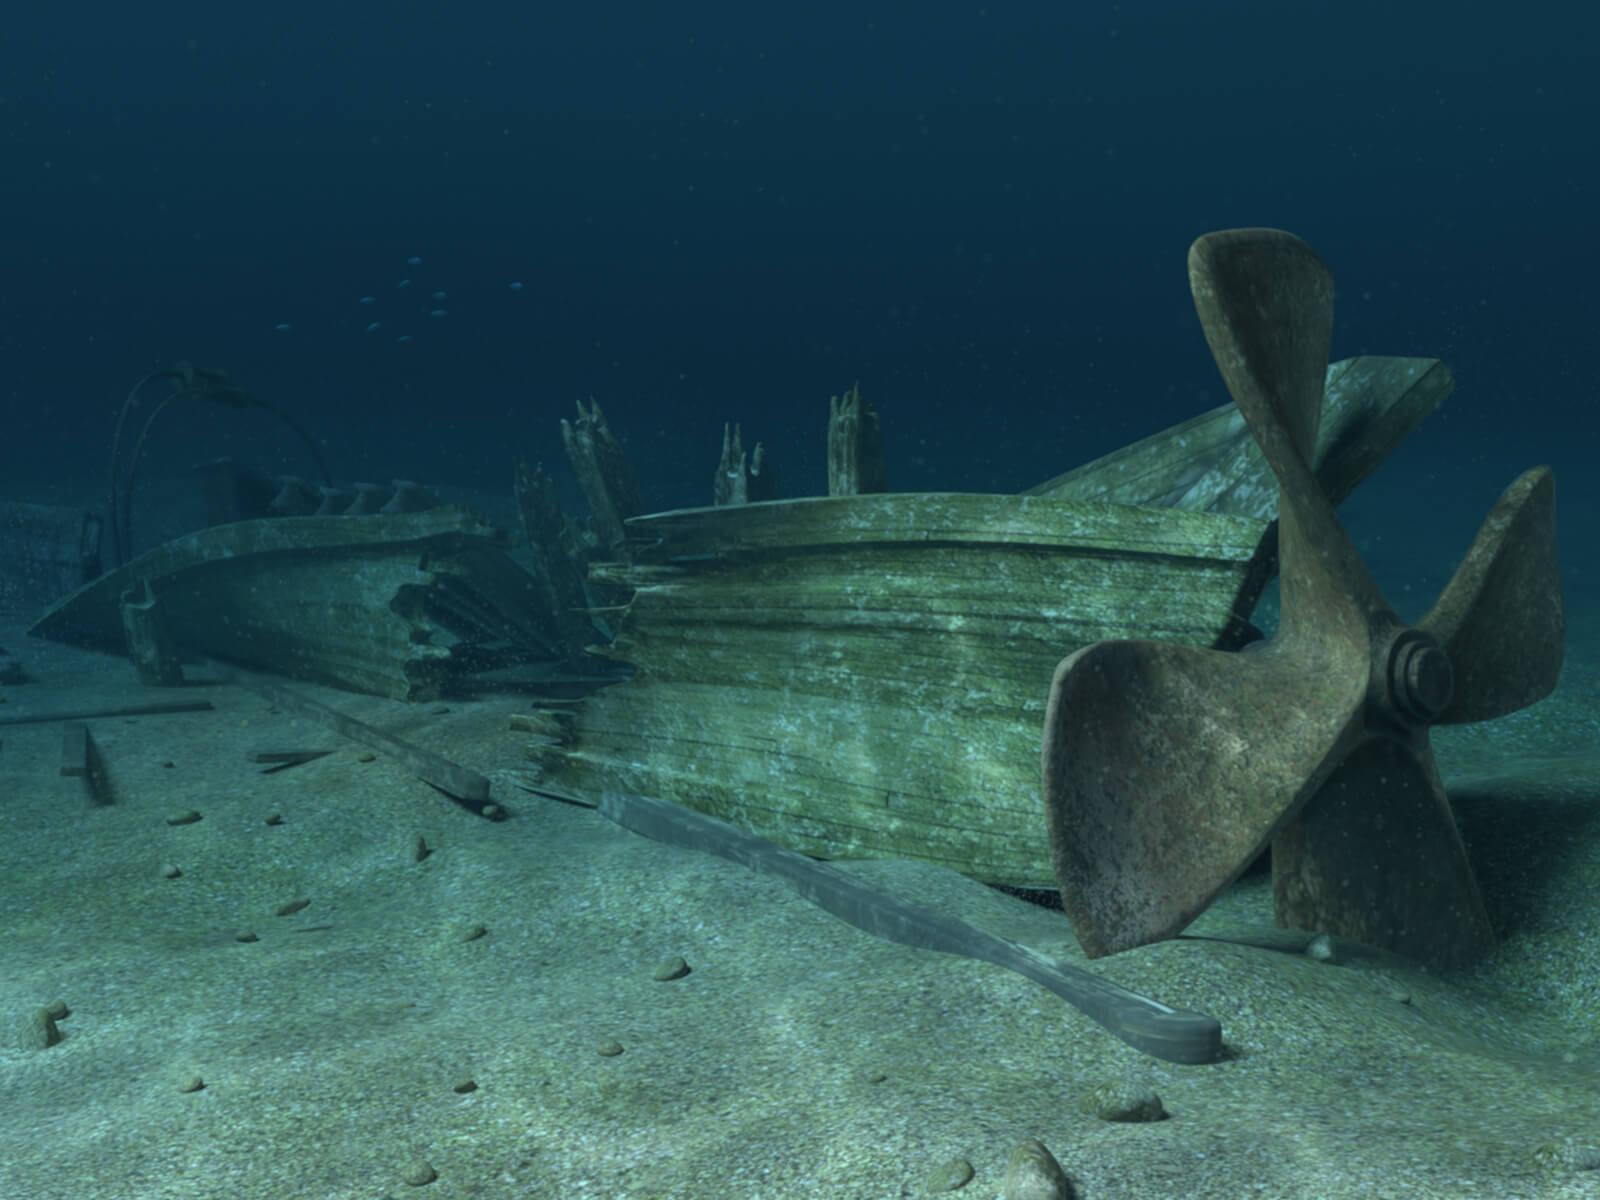 computer-generated 3D underwater environment featuring a sunken ship with a large propeller